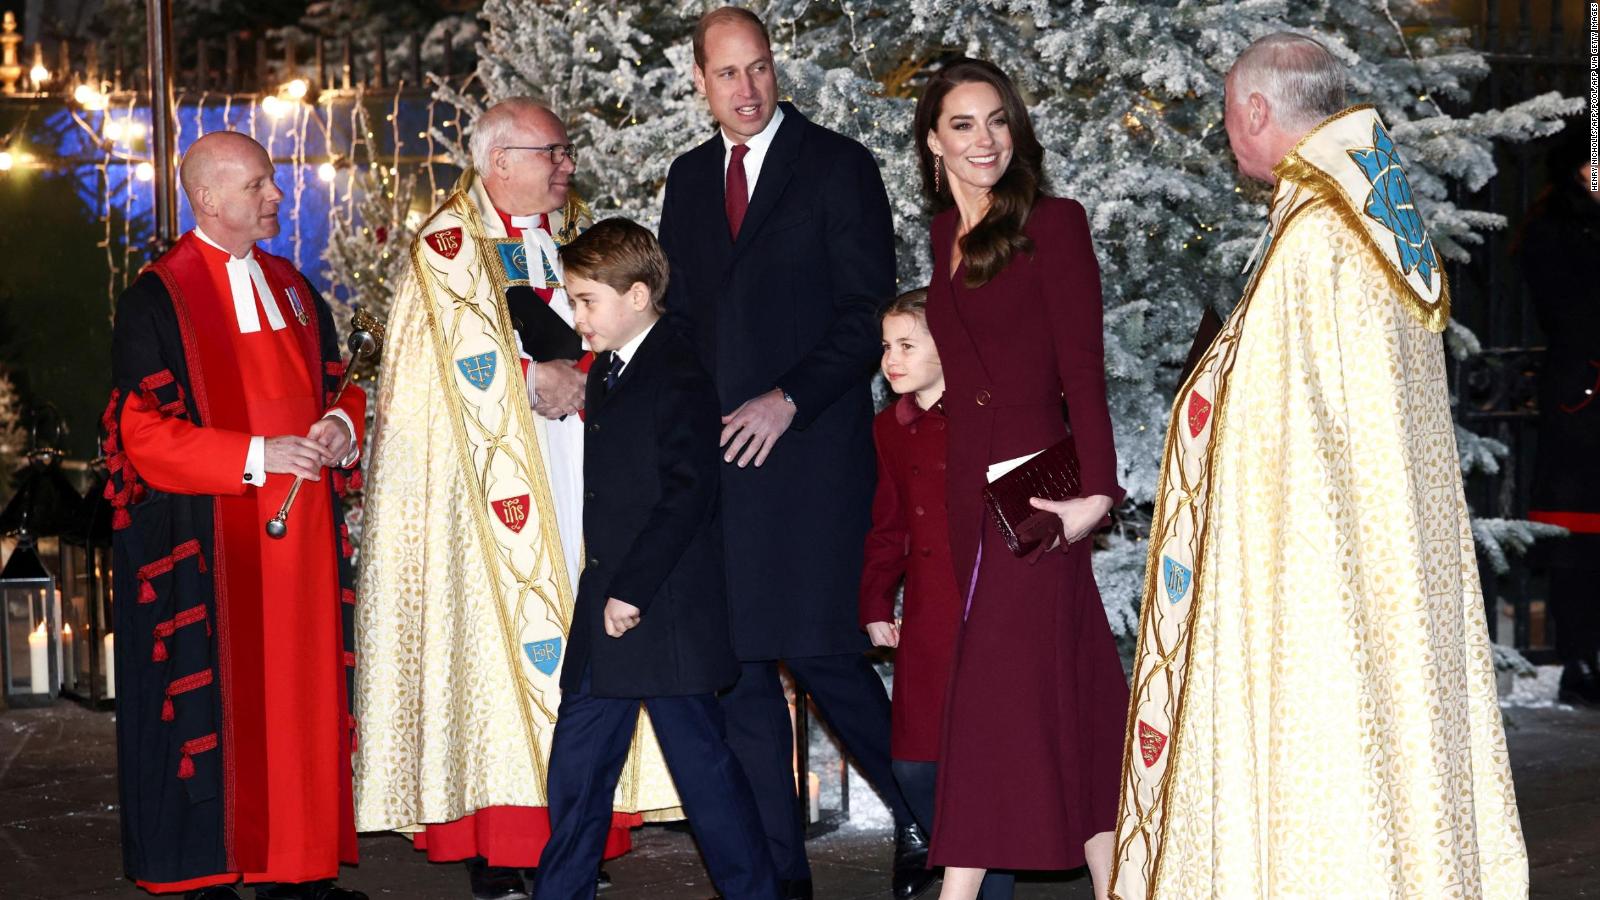 The princes of Wales attend Christmas carol concert in London The